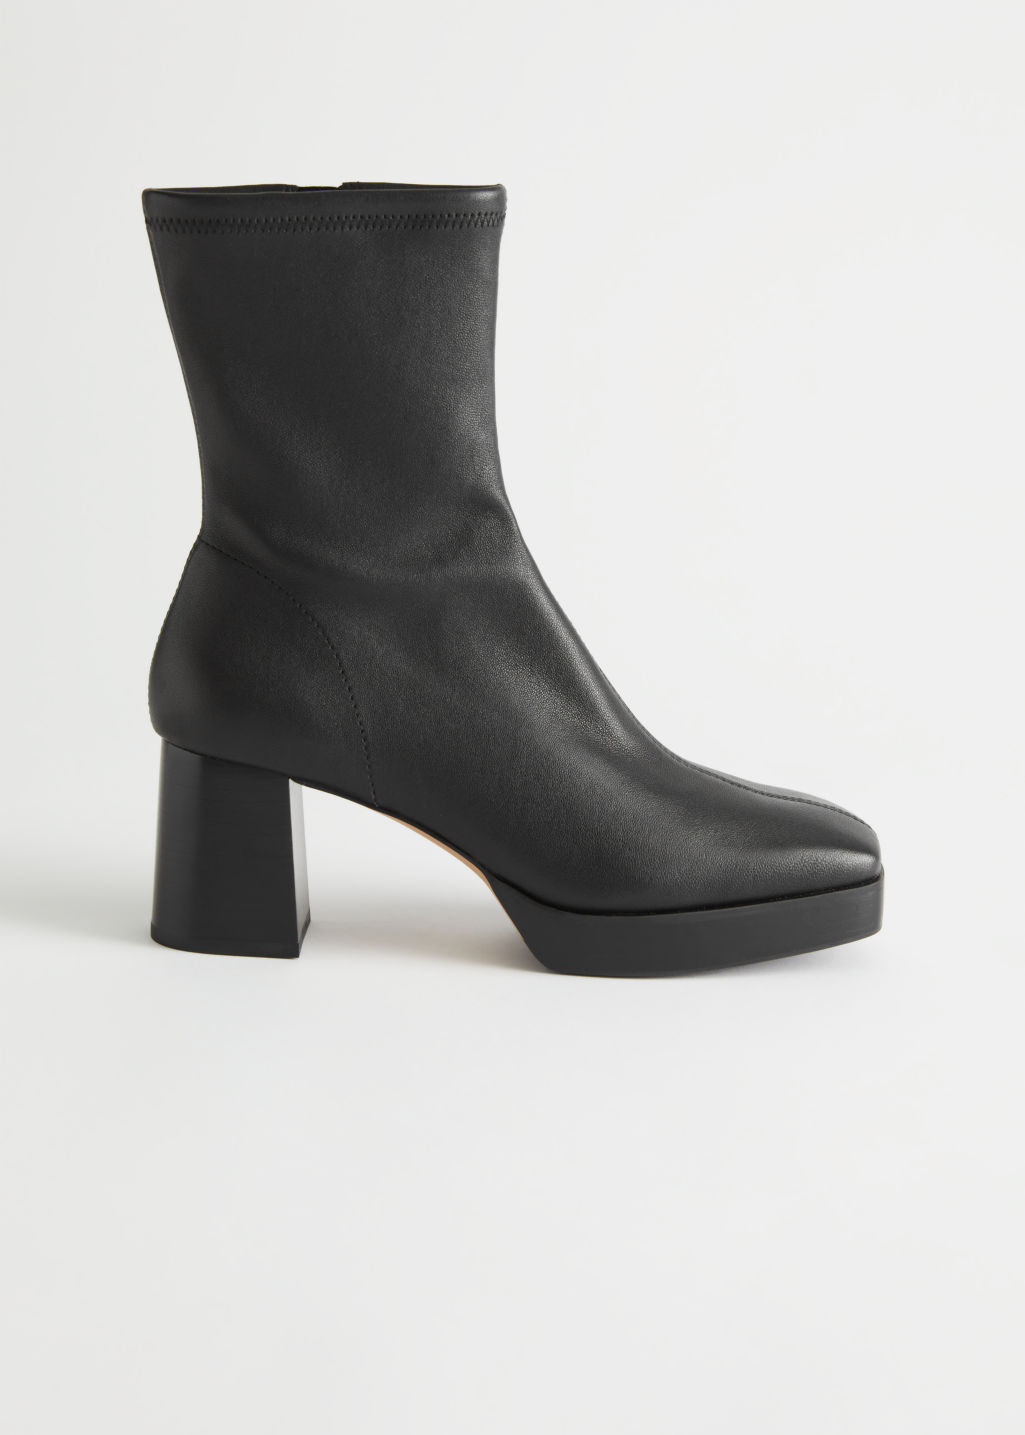 The 19 Most Stylish Block-Heel Ankle Boots of 2022 | Who What Wear UK